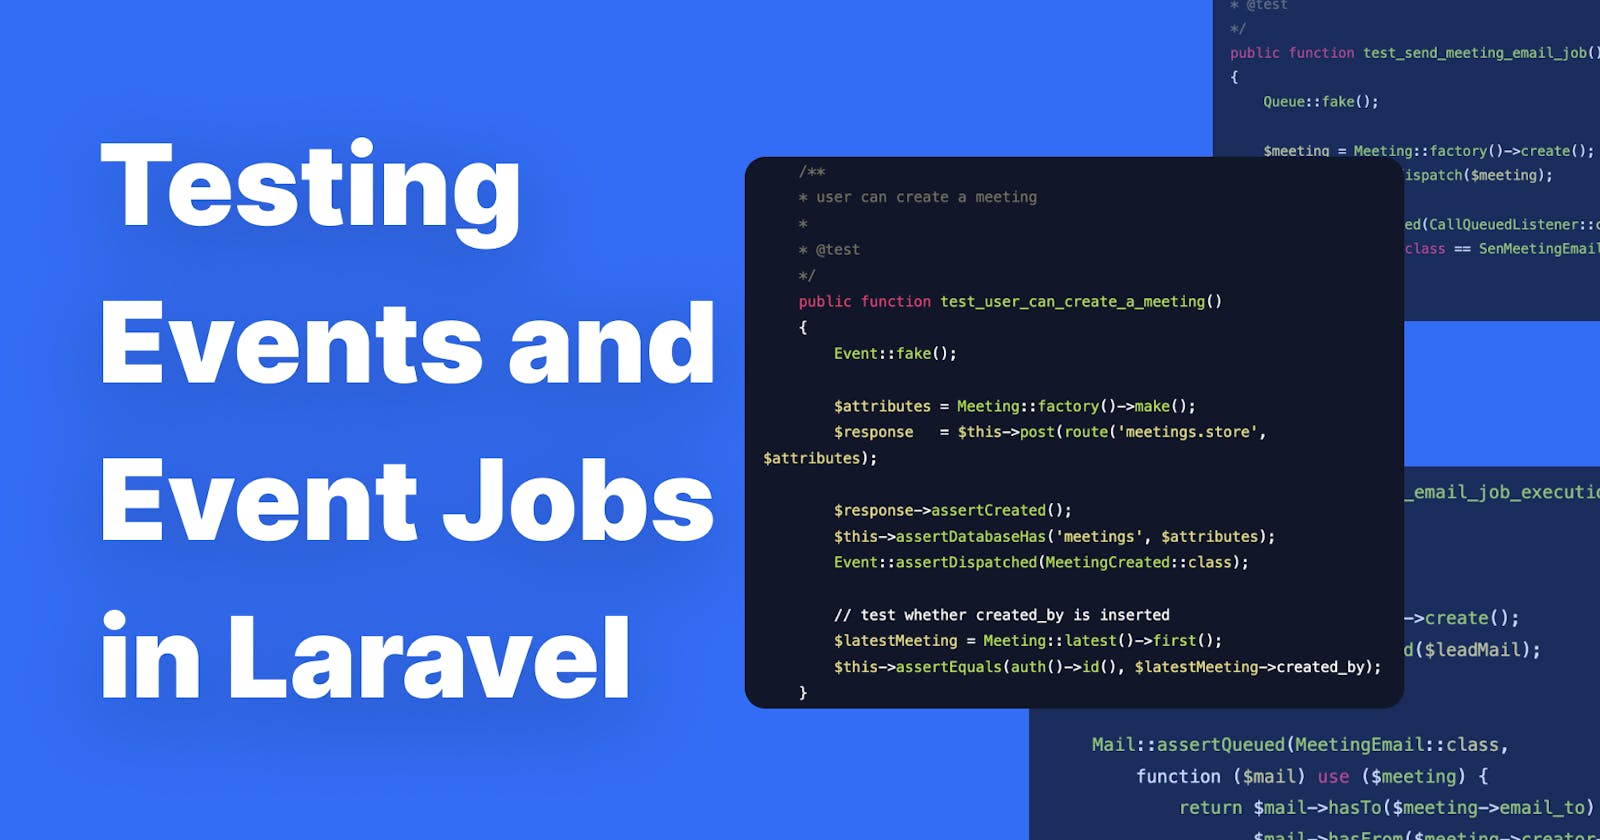 Efficiently Testing Events and Event Jobs in Laravel